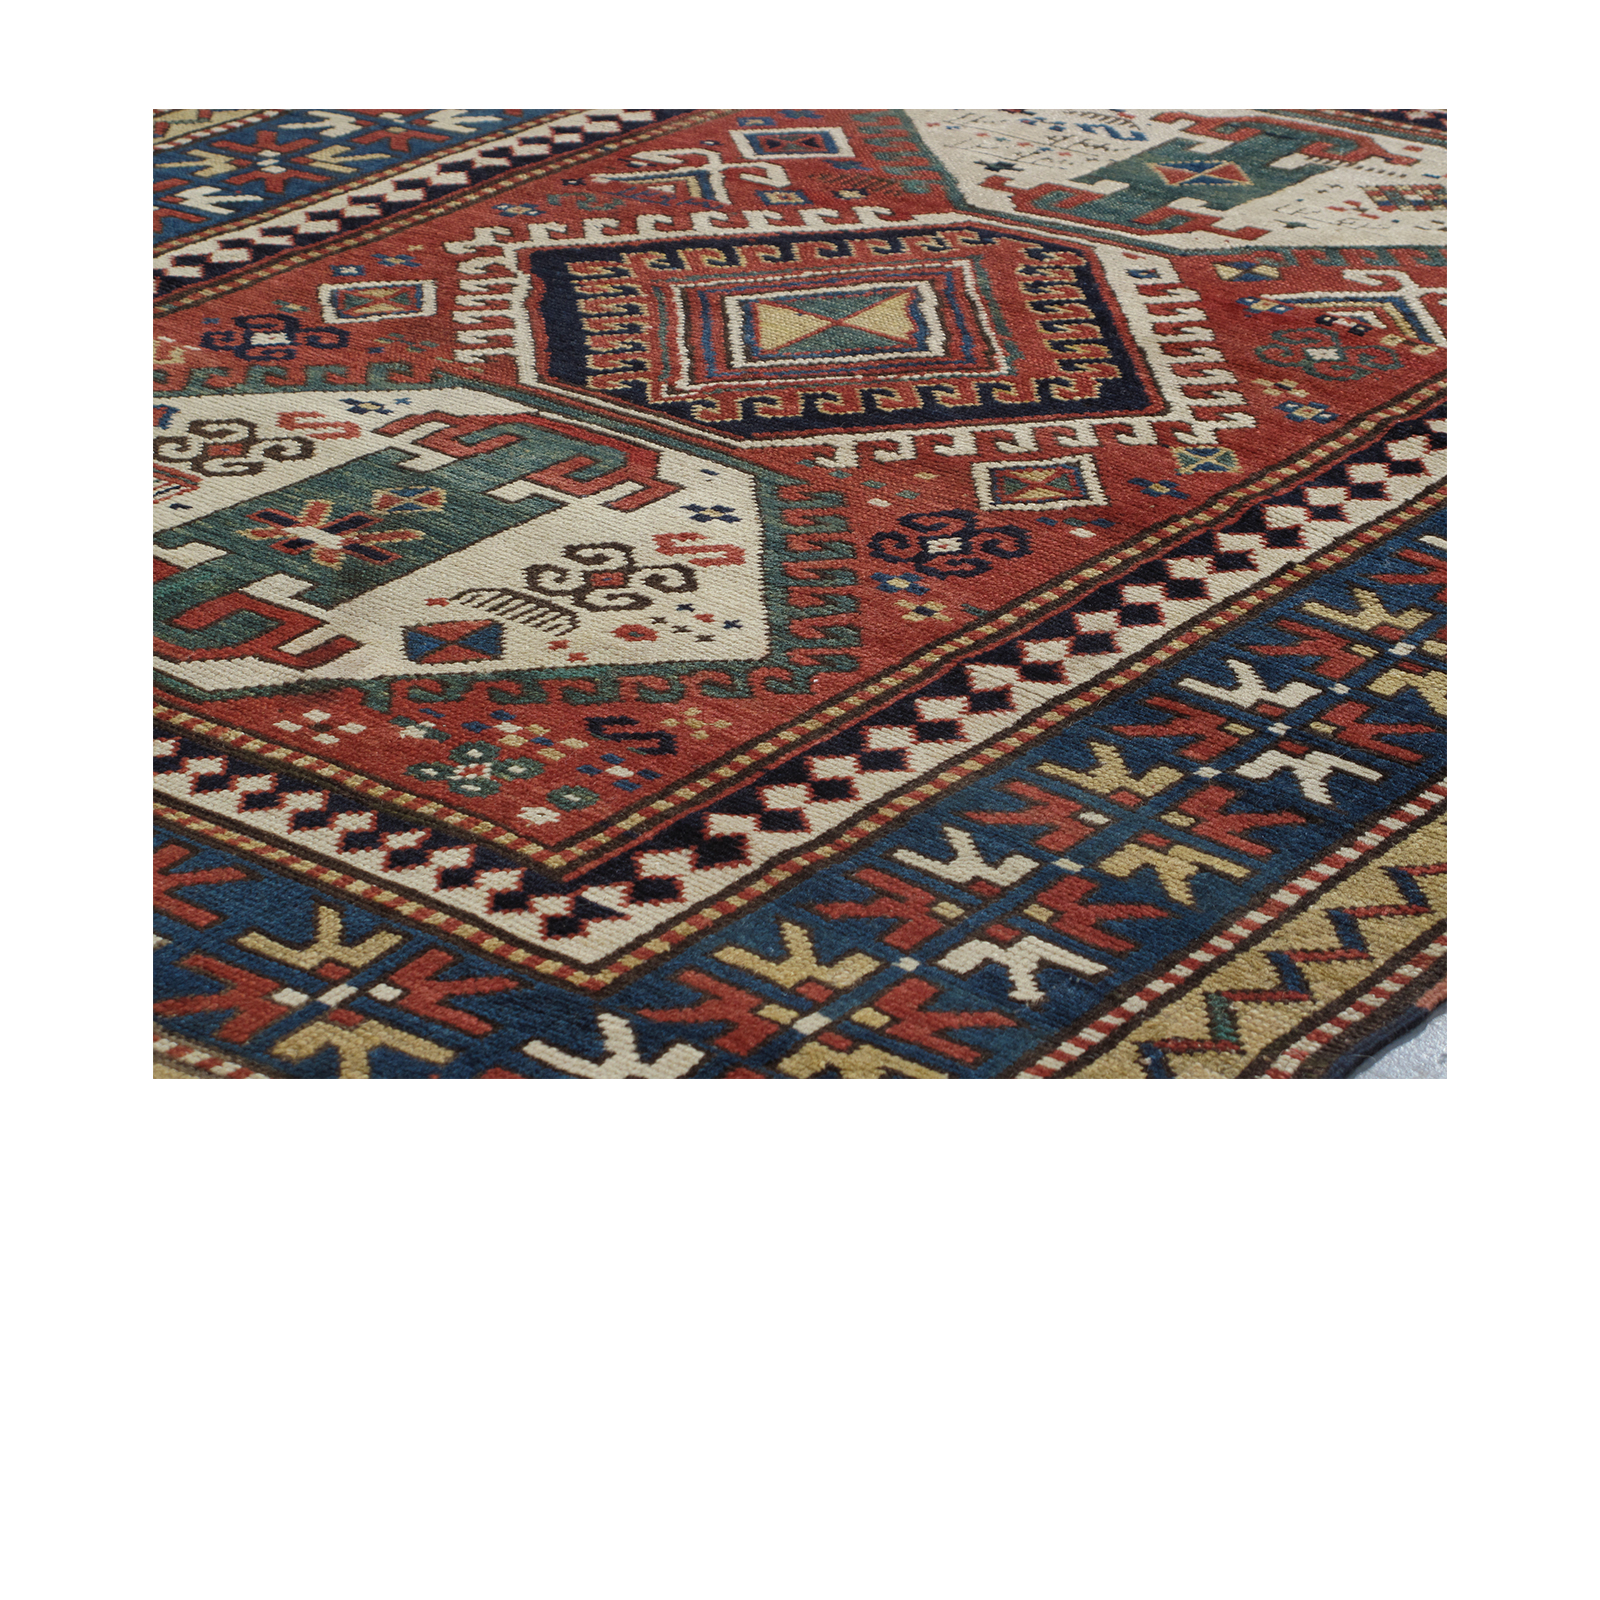 This Kazak rug is hand-knotted and made of 100% wool.